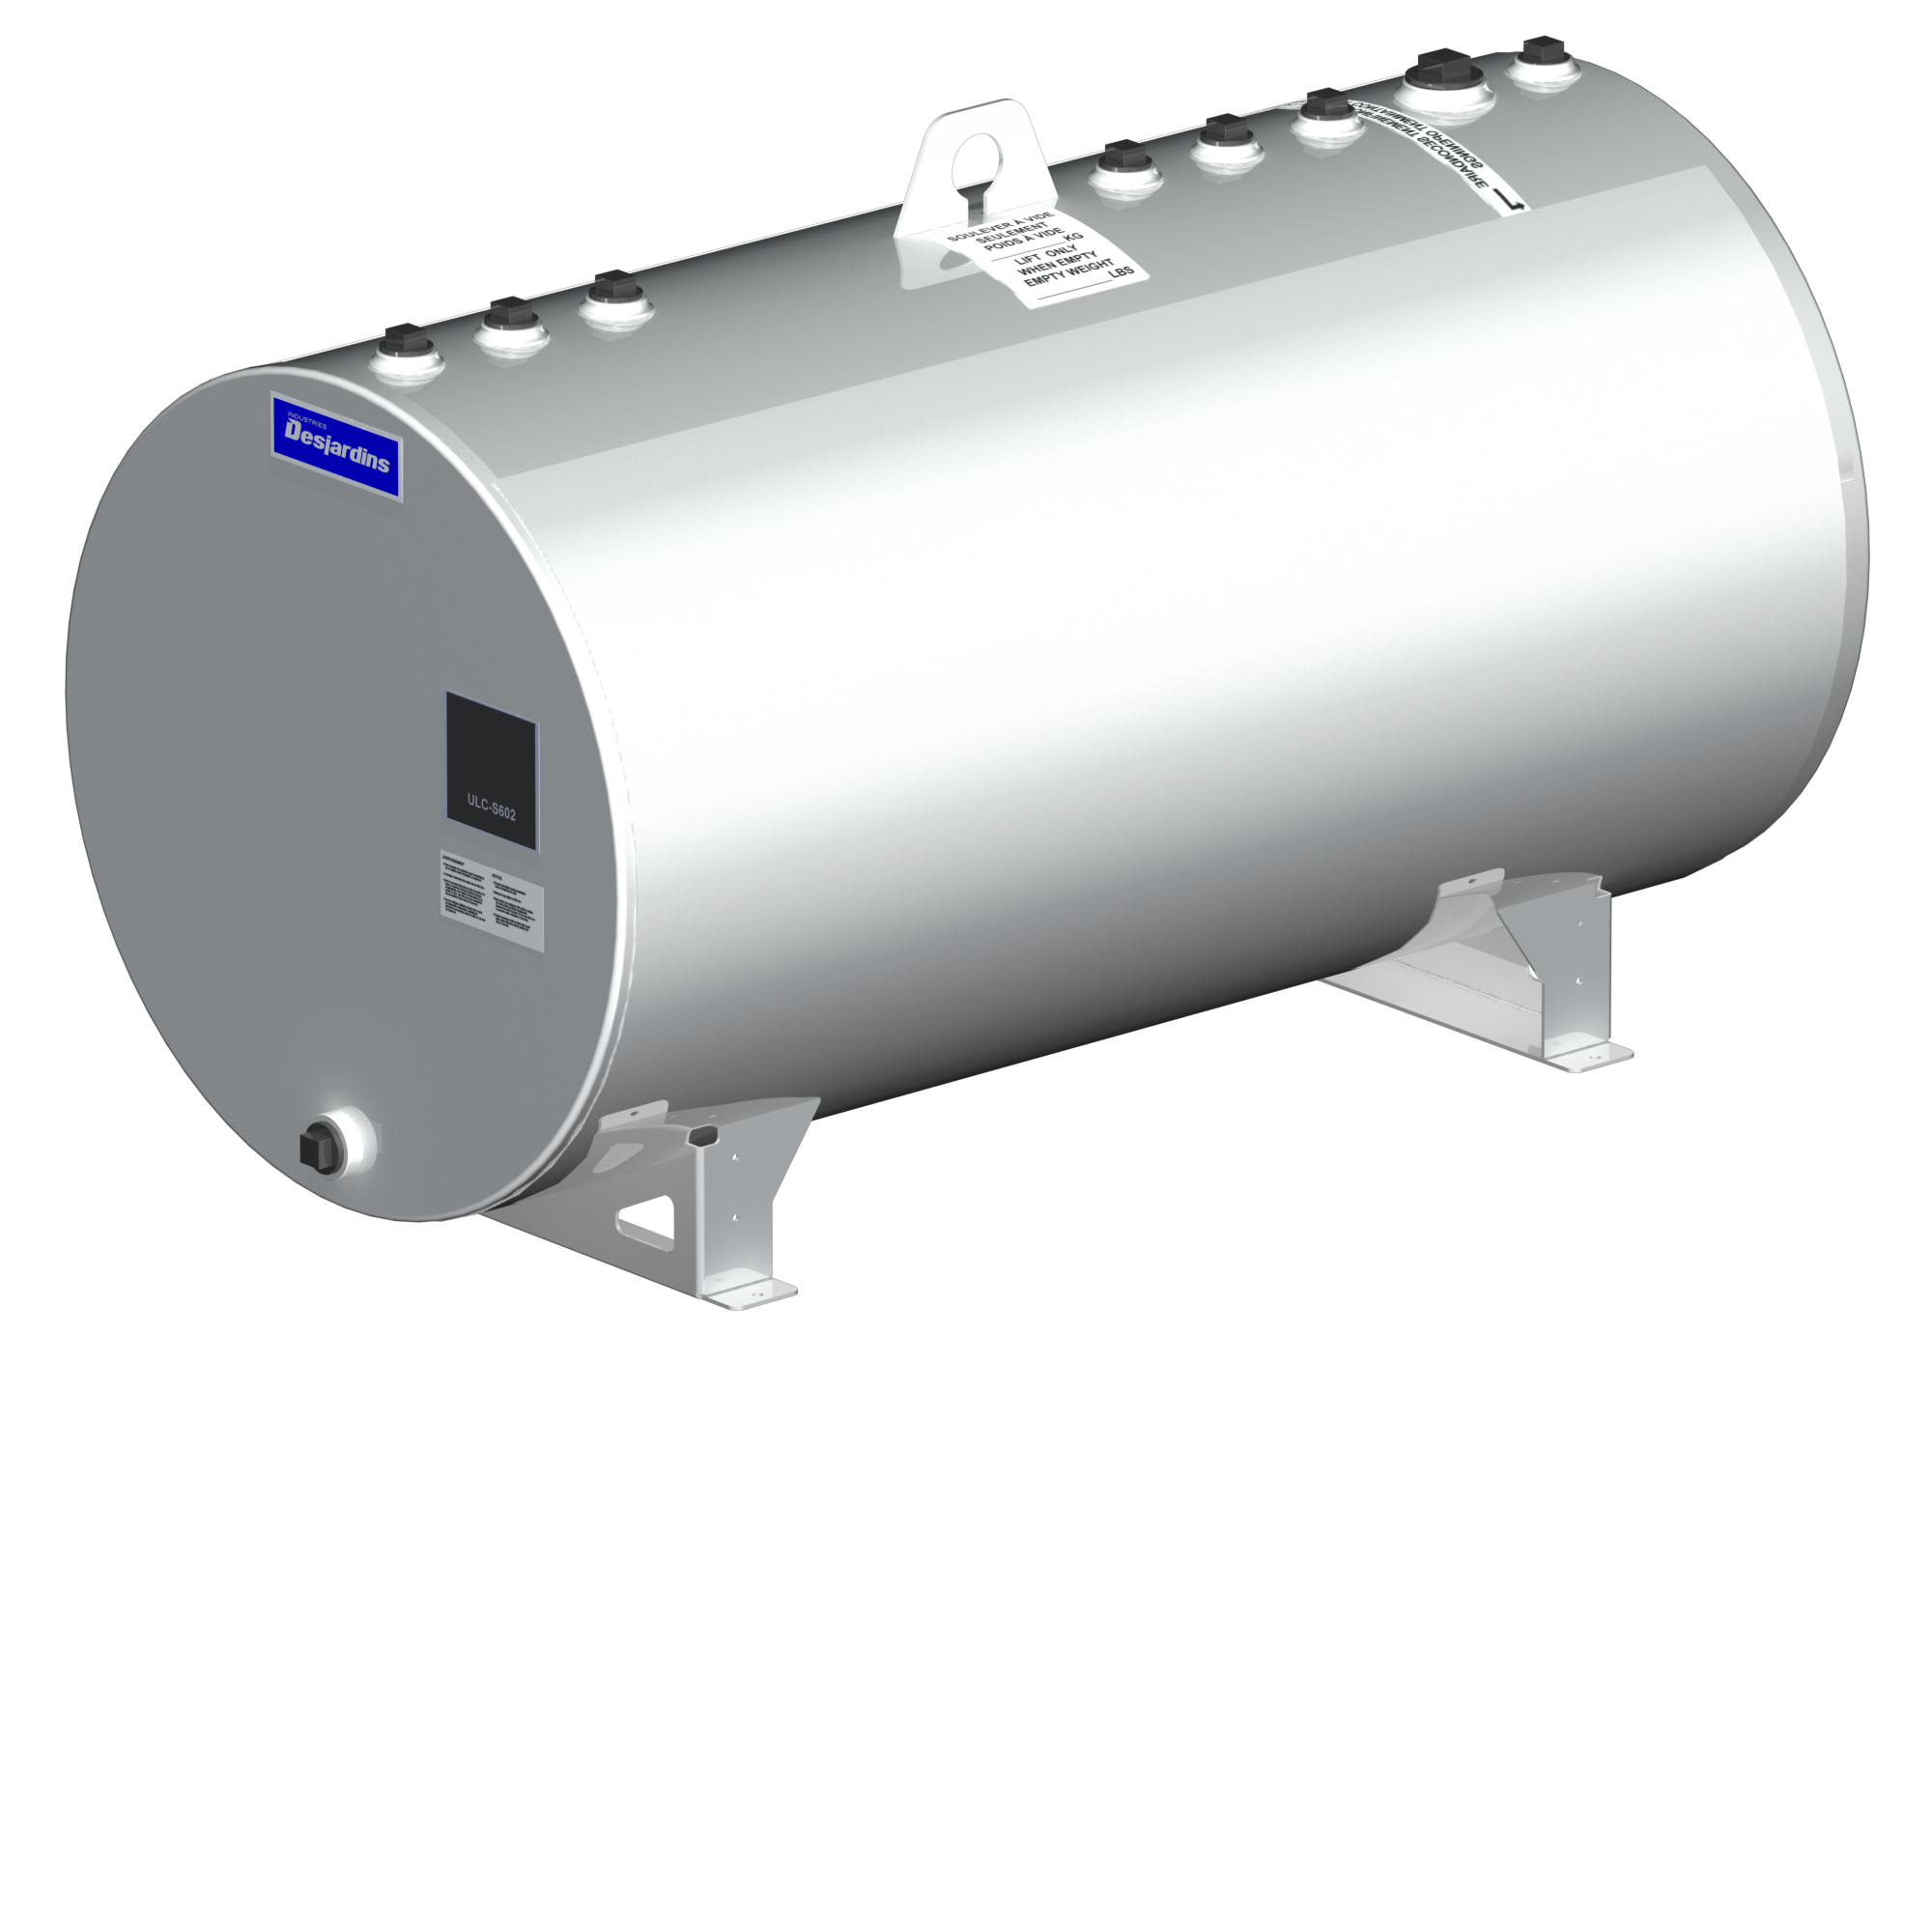 Aboveground steel tanks for fuel oil and lubricating oil